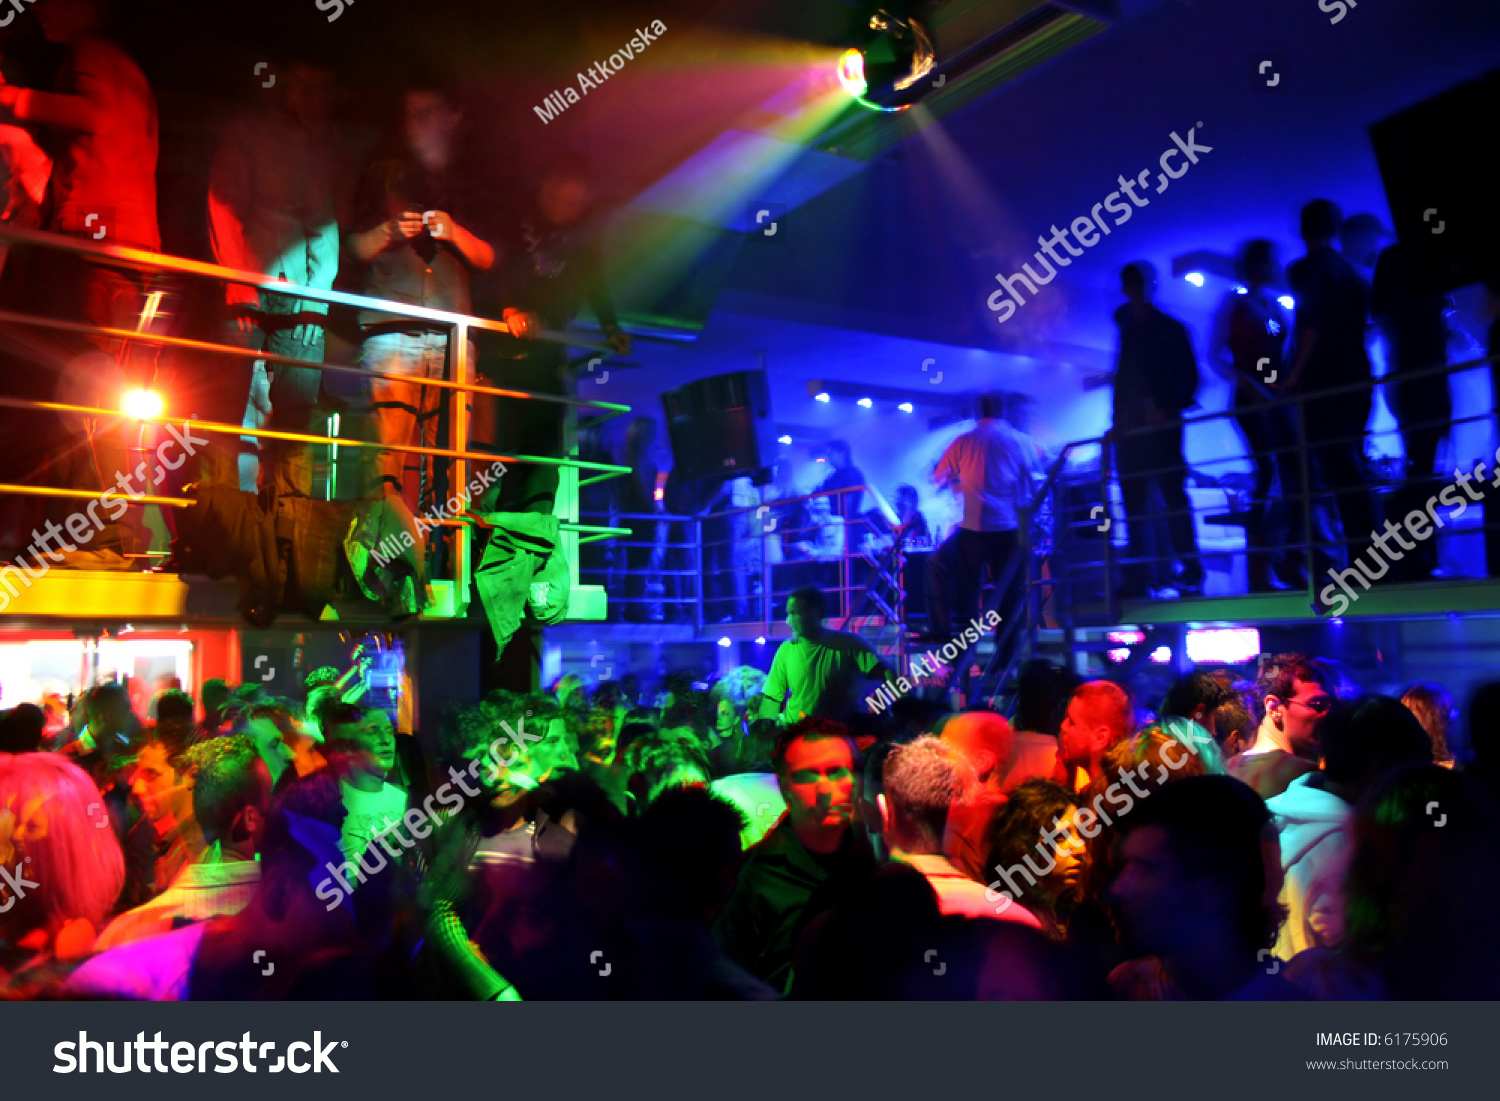 A Crowded Club Stock Photo 6175906 : Shutterstock